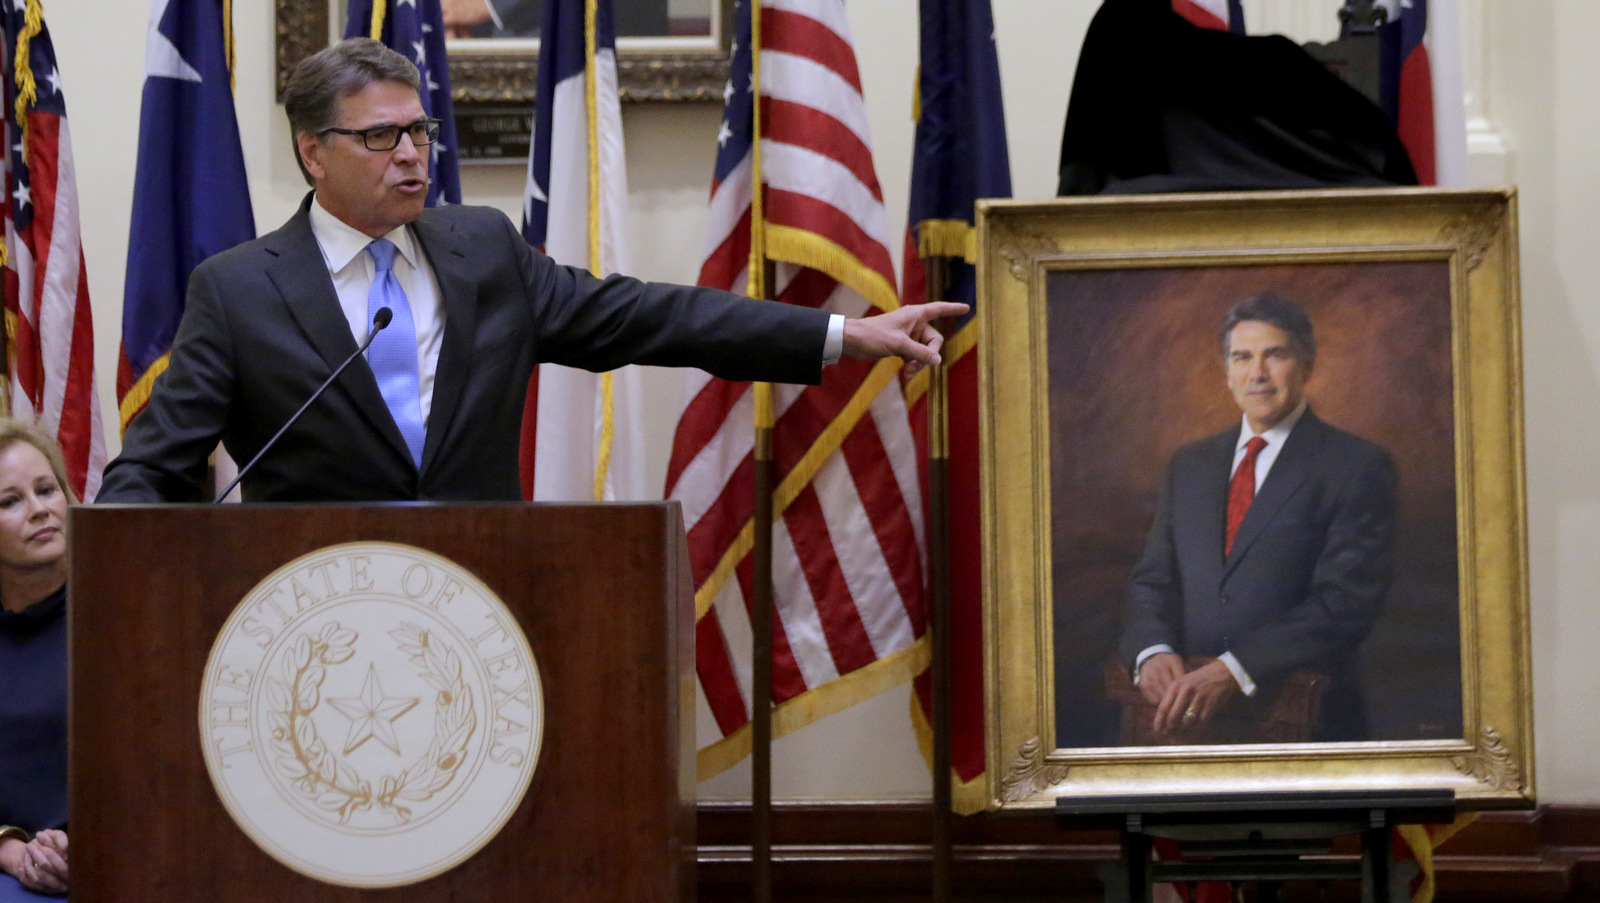 Former Texas Gov. Rick Perry during a ceremony for the unveiling of his portrait in the Capitol rotunda, Friday, May 6, 2016, in Austin, Texas. (AP Photo/Eric Gay)